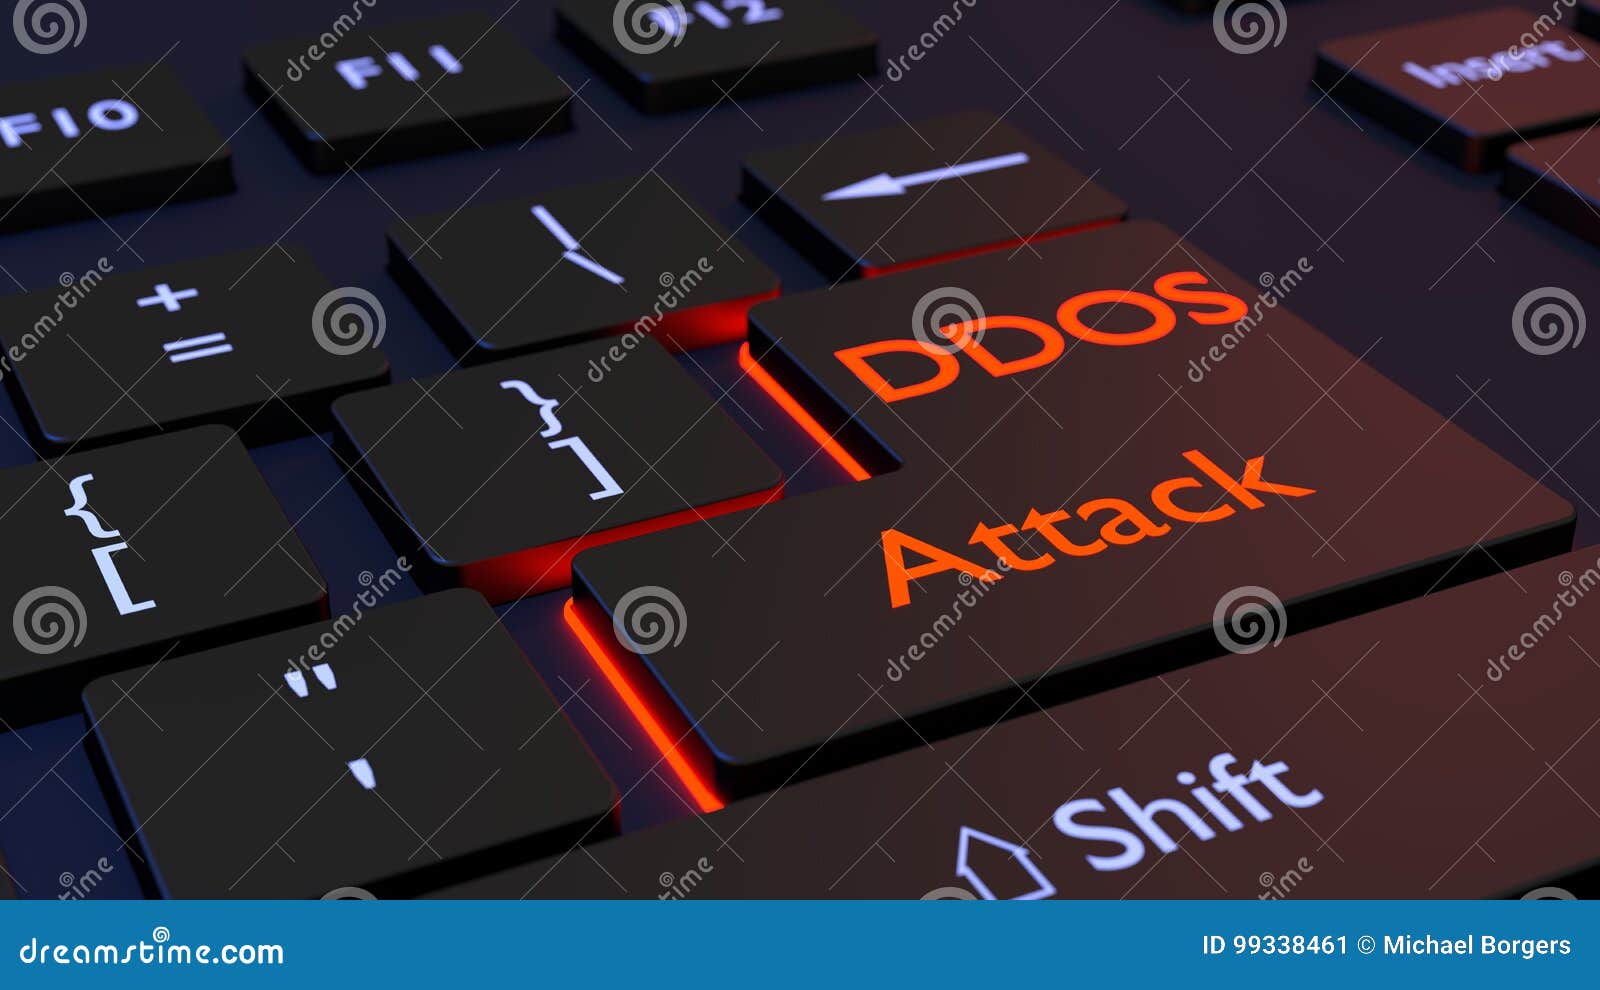 distributed denial of service black keyboard with ddos enter key